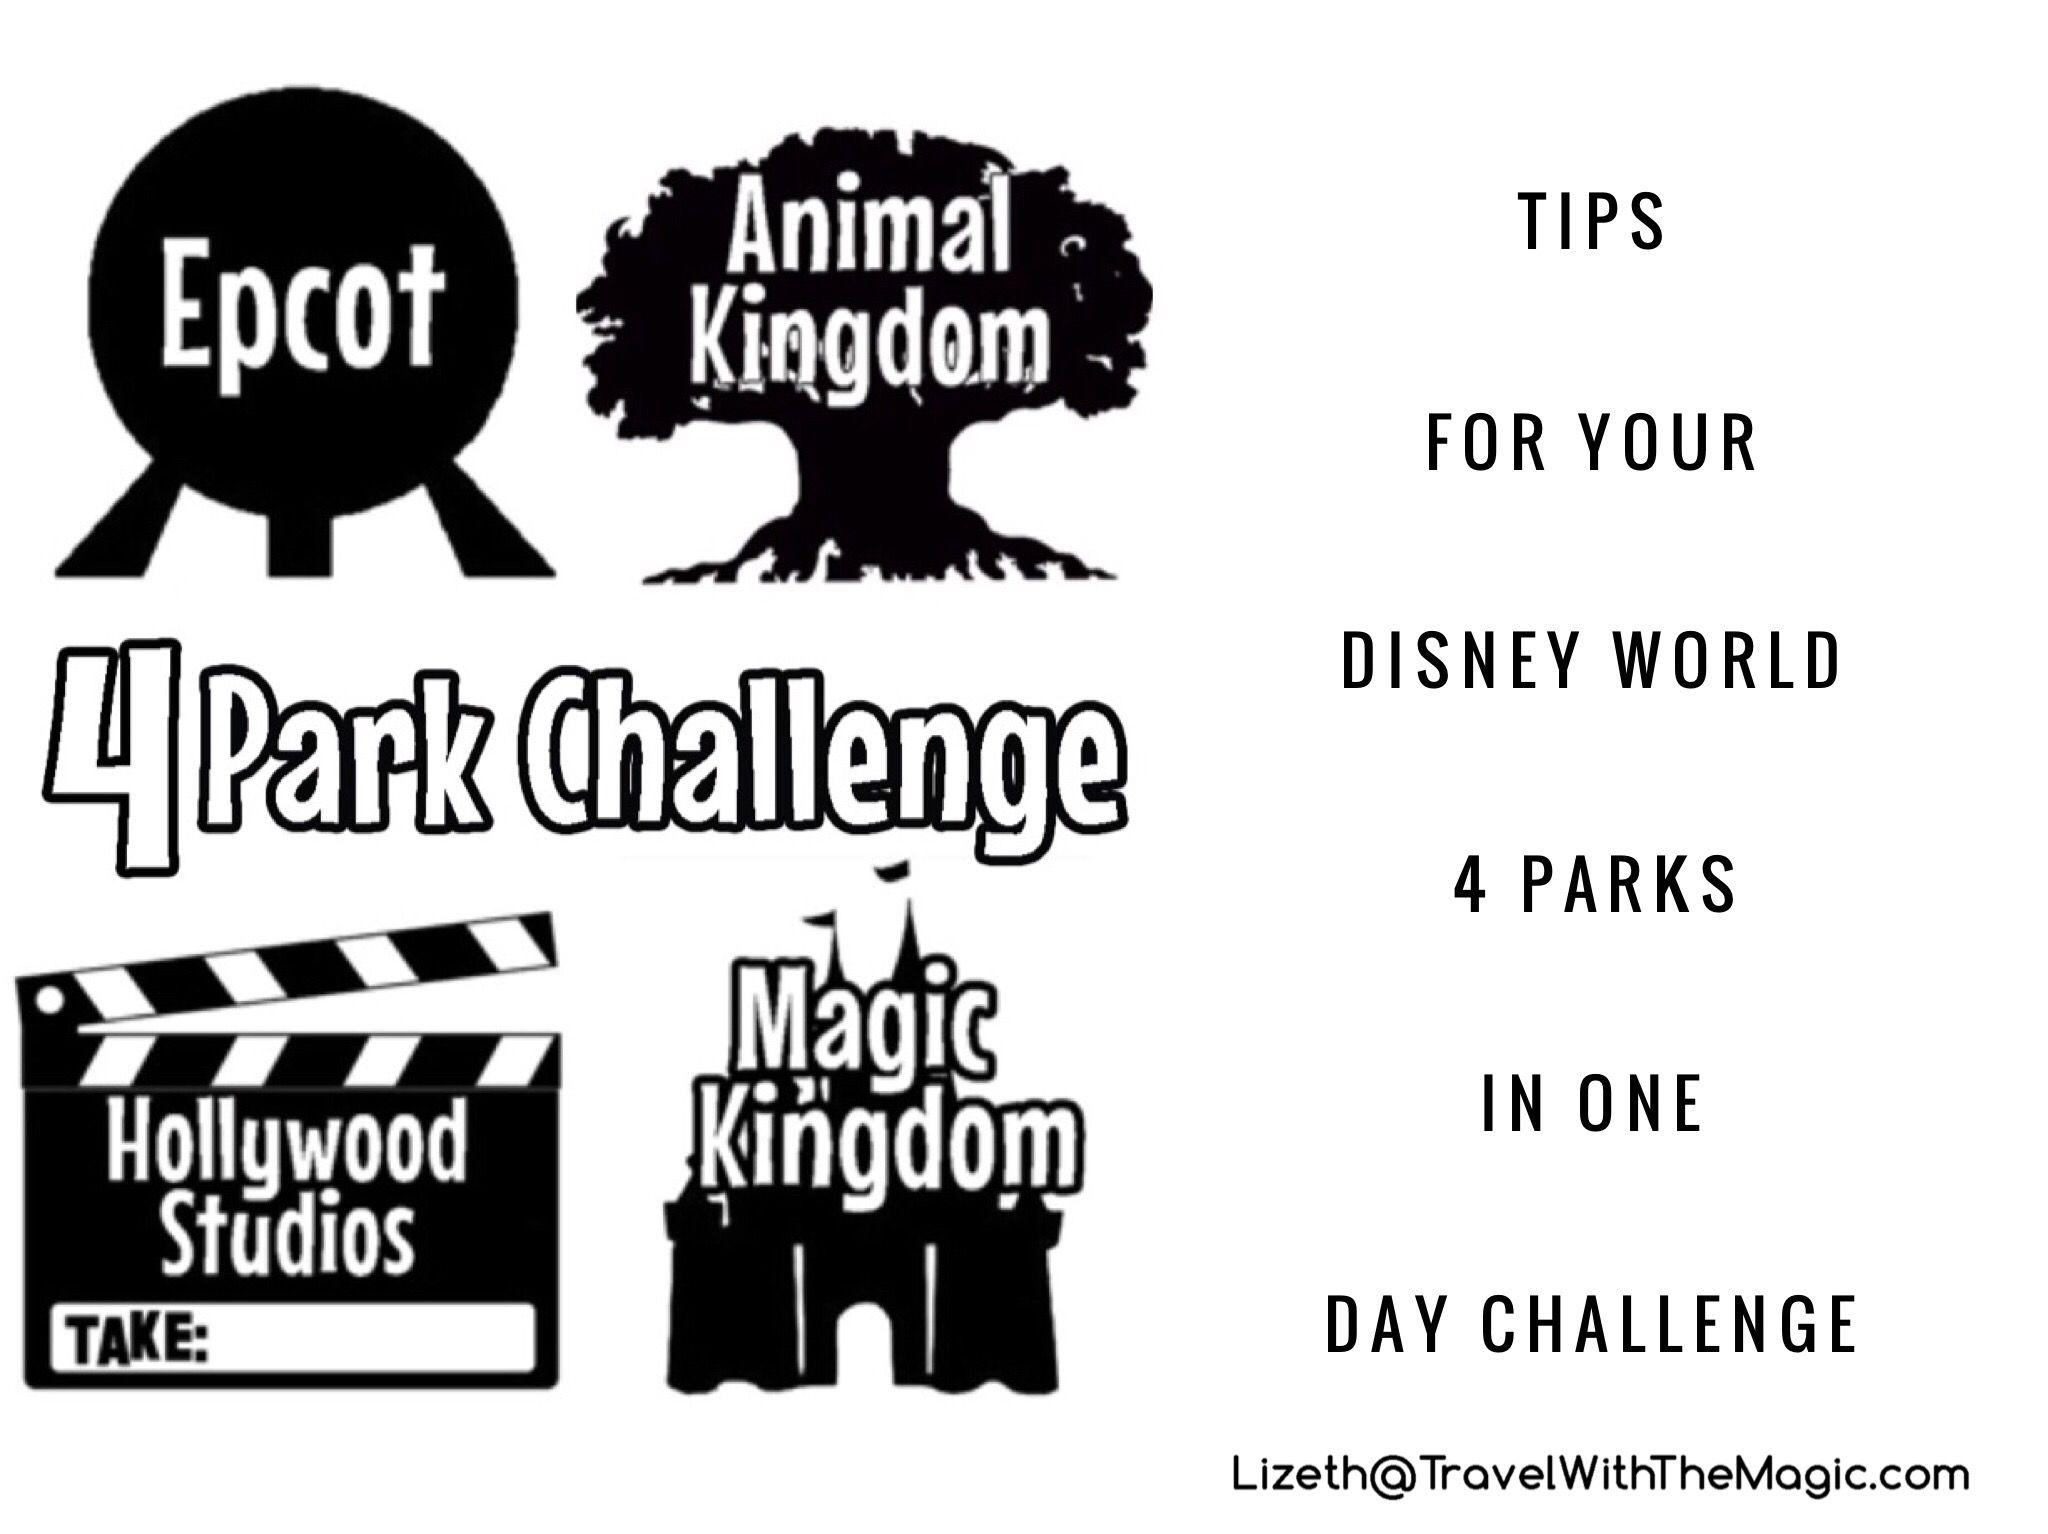 4 Disney Park Logo - Tips for Your Disney World 4 Parks in ONE Day Challenge